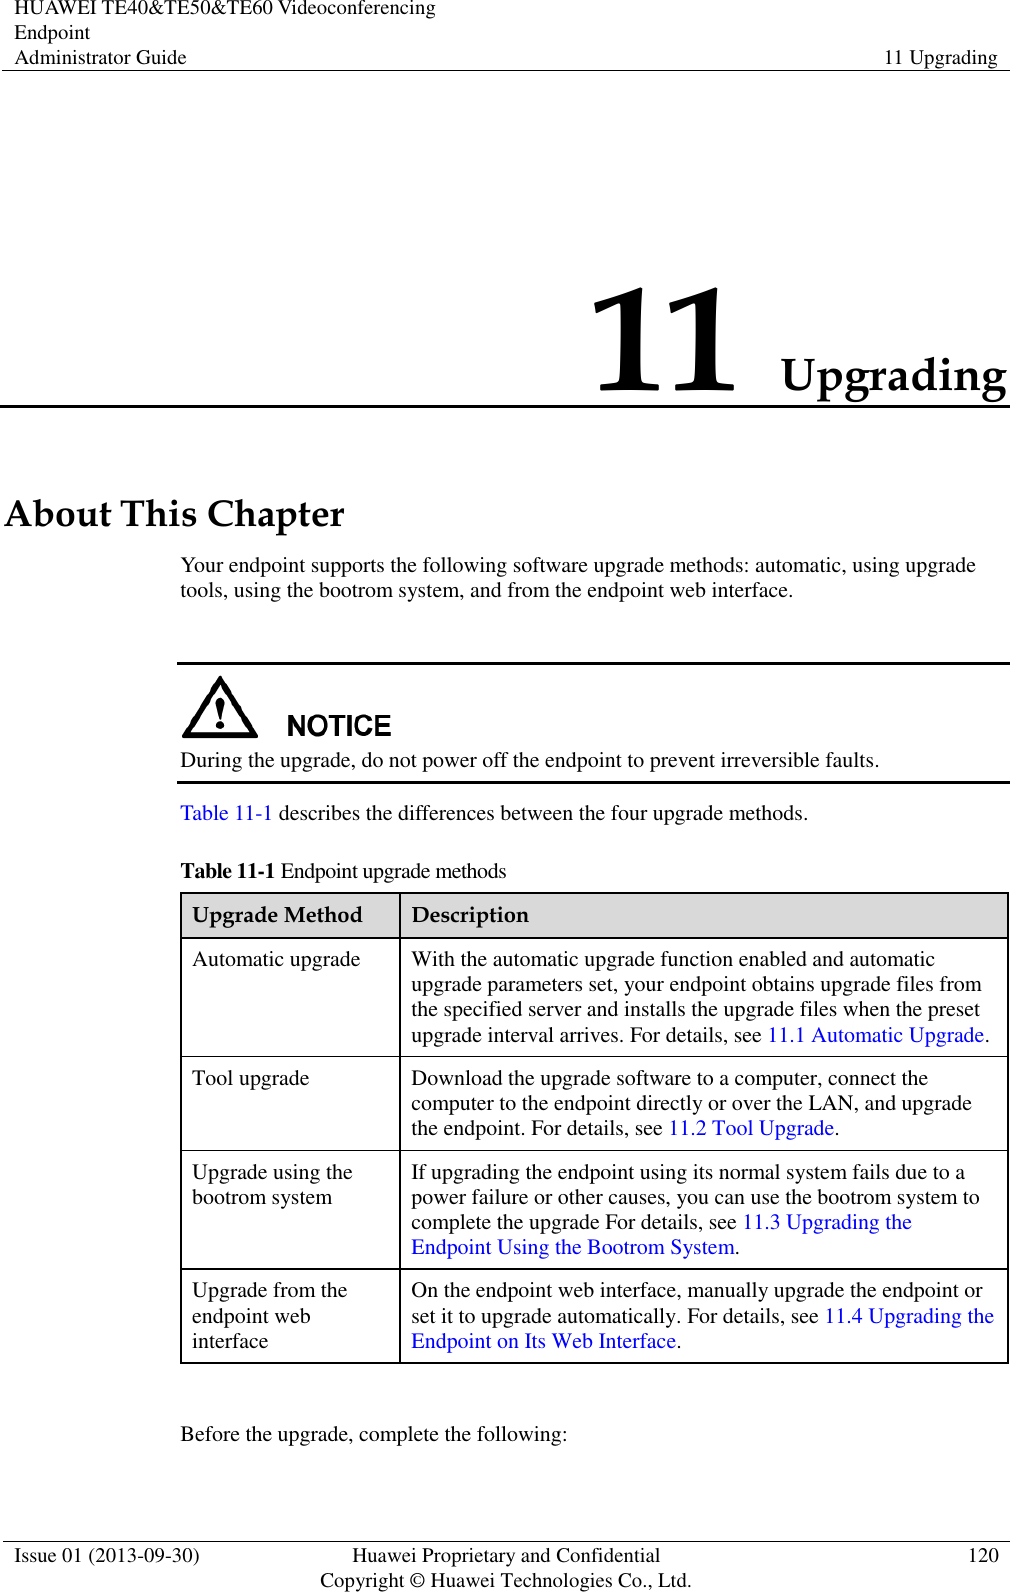 HUAWEI TE40&amp;TE50&amp;TE60 Videoconferencing Endpoint Administrator Guide 11 Upgrading  Issue 01 (2013-09-30) Huawei Proprietary and Confidential                                     Copyright © Huawei Technologies Co., Ltd. 120  11 Upgrading About This Chapter Your endpoint supports the following software upgrade methods: automatic, using upgrade tools, using the bootrom system, and from the endpoint web interface.   During the upgrade, do not power off the endpoint to prevent irreversible faults. Table 11-1 describes the differences between the four upgrade methods. Table 11-1 Endpoint upgrade methods Upgrade Method Description Automatic upgrade With the automatic upgrade function enabled and automatic upgrade parameters set, your endpoint obtains upgrade files from the specified server and installs the upgrade files when the preset upgrade interval arrives. For details, see 11.1 Automatic Upgrade. Tool upgrade Download the upgrade software to a computer, connect the computer to the endpoint directly or over the LAN, and upgrade the endpoint. For details, see 11.2 Tool Upgrade. Upgrade using the bootrom system If upgrading the endpoint using its normal system fails due to a power failure or other causes, you can use the bootrom system to complete the upgrade For details, see 11.3 Upgrading the Endpoint Using the Bootrom System. Upgrade from the endpoint web interface On the endpoint web interface, manually upgrade the endpoint or set it to upgrade automatically. For details, see 11.4 Upgrading the Endpoint on Its Web Interface.  Before the upgrade, complete the following: 